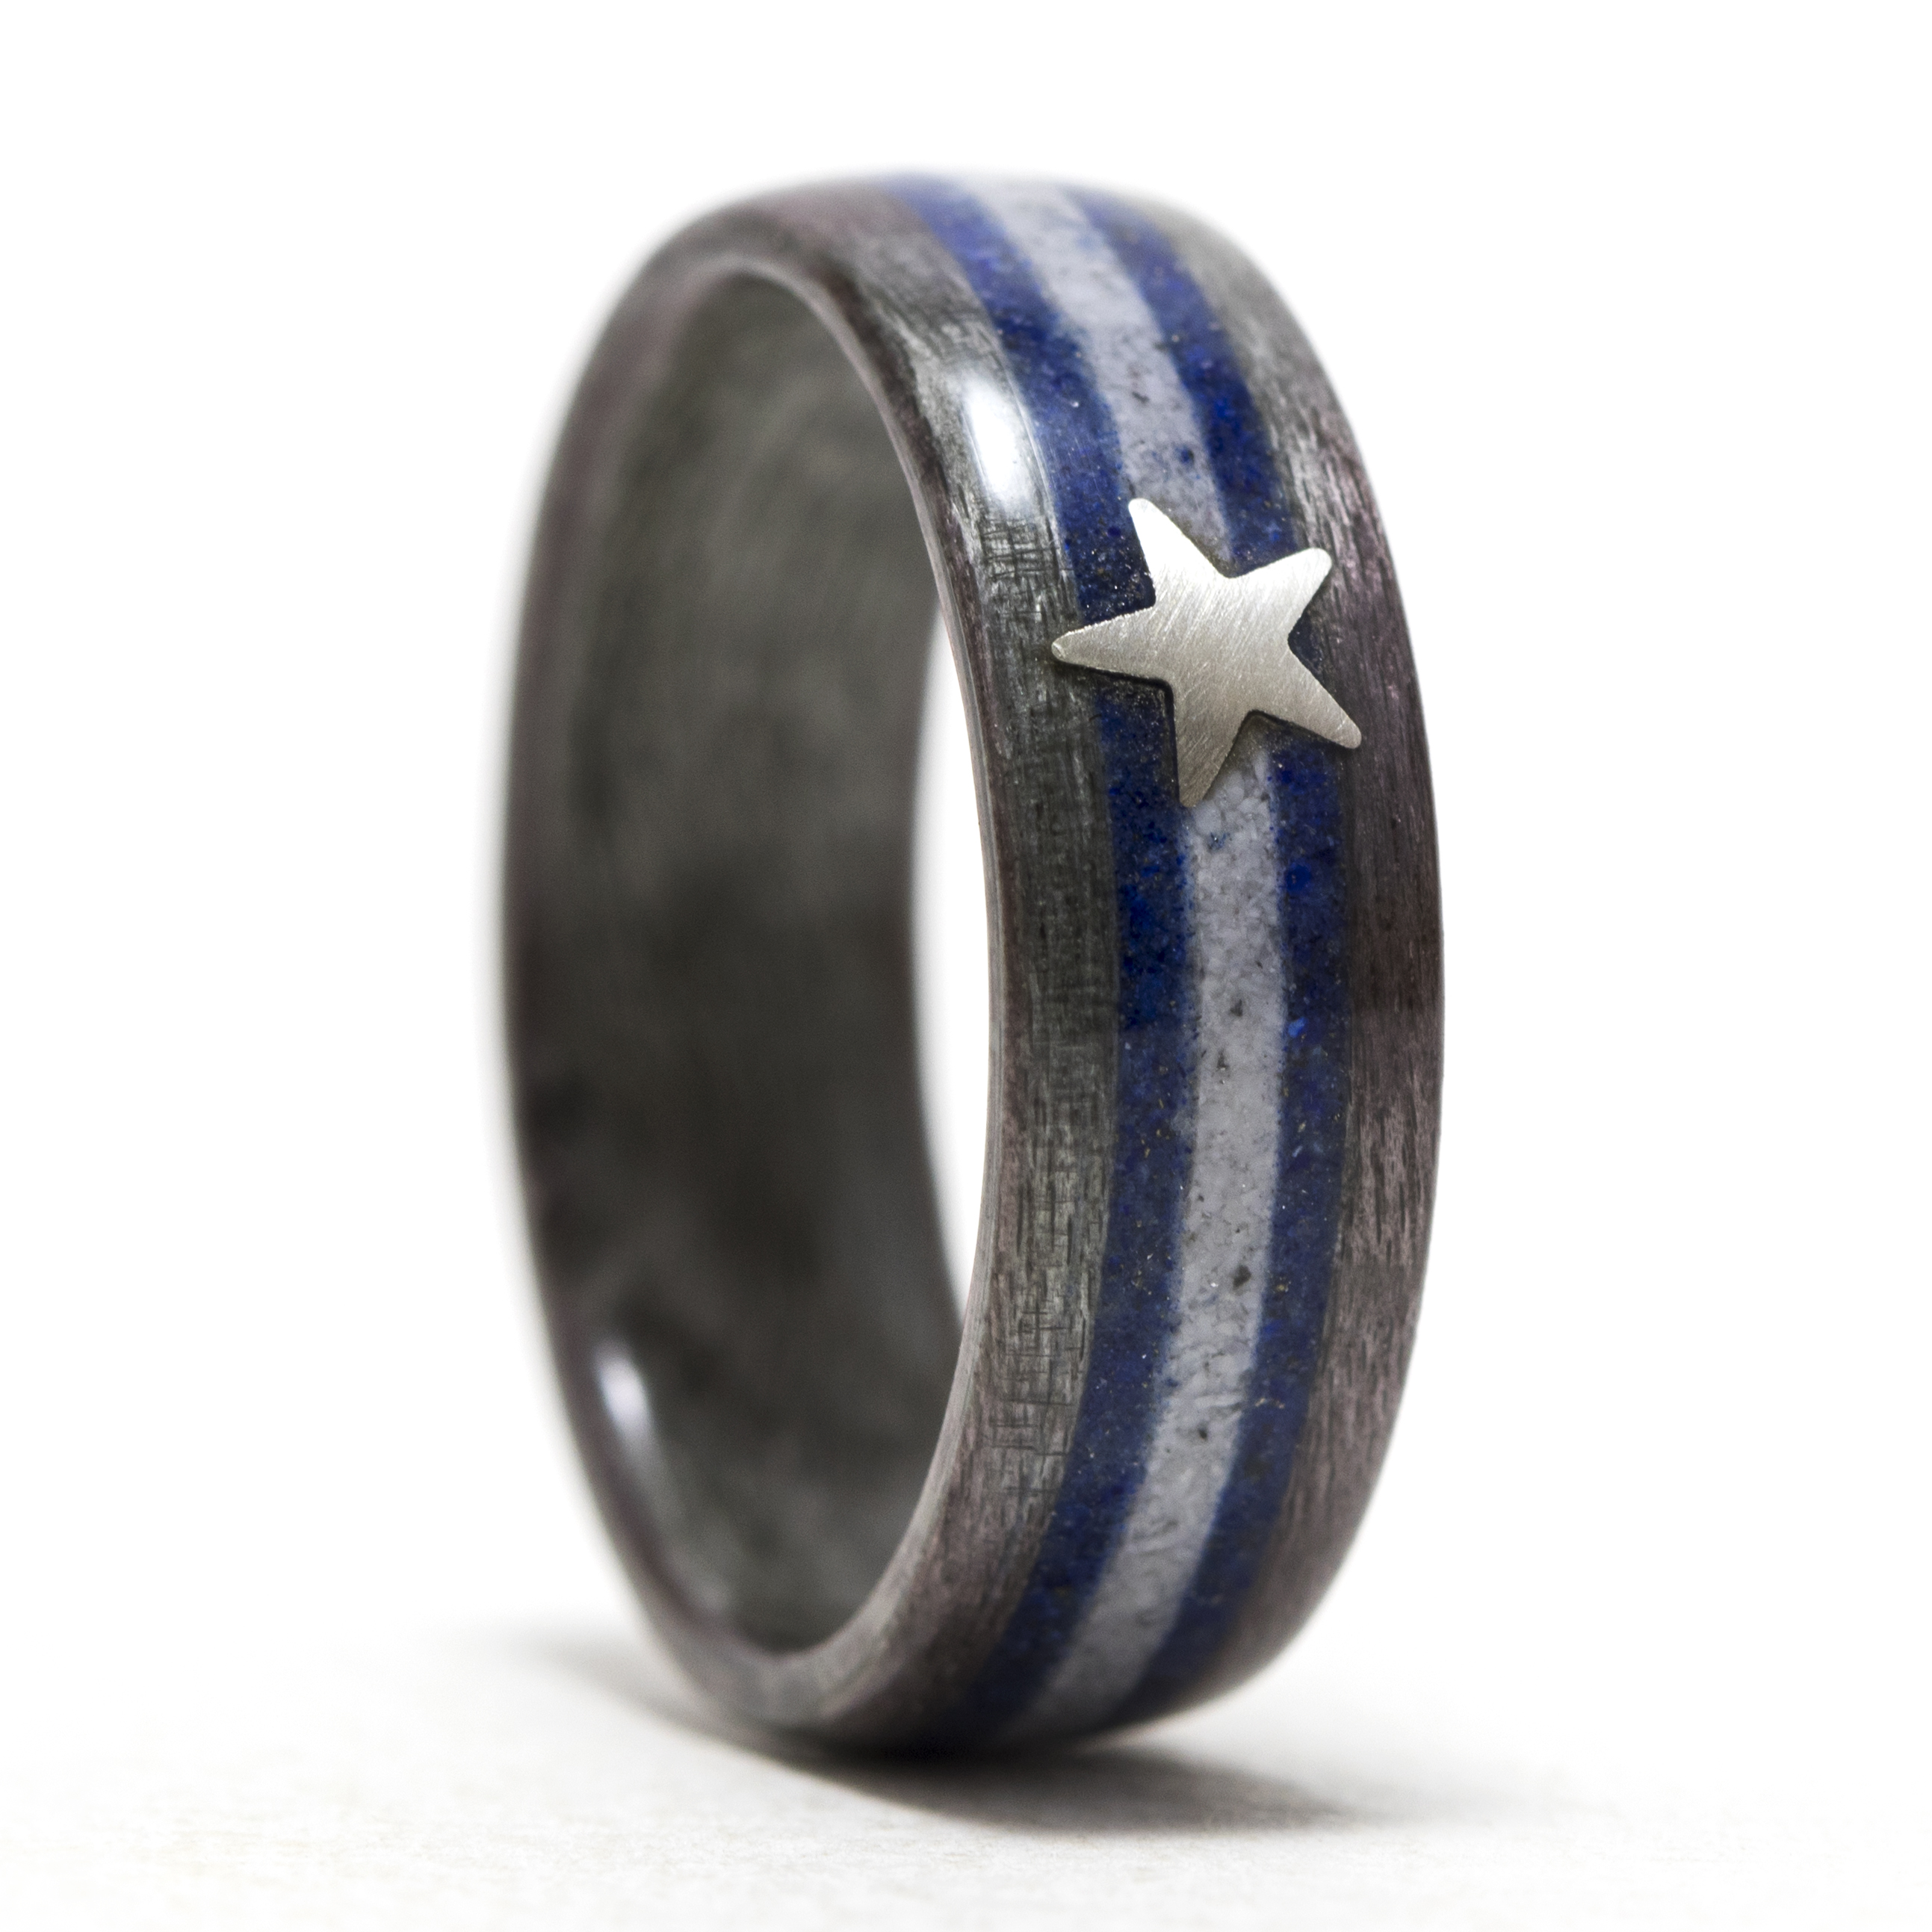 Dallas Cowboys Ring - Gray Birdseye Maple Inlaid With Lapis Lazuli,  Howlite, And Silver Star - Warren Rings